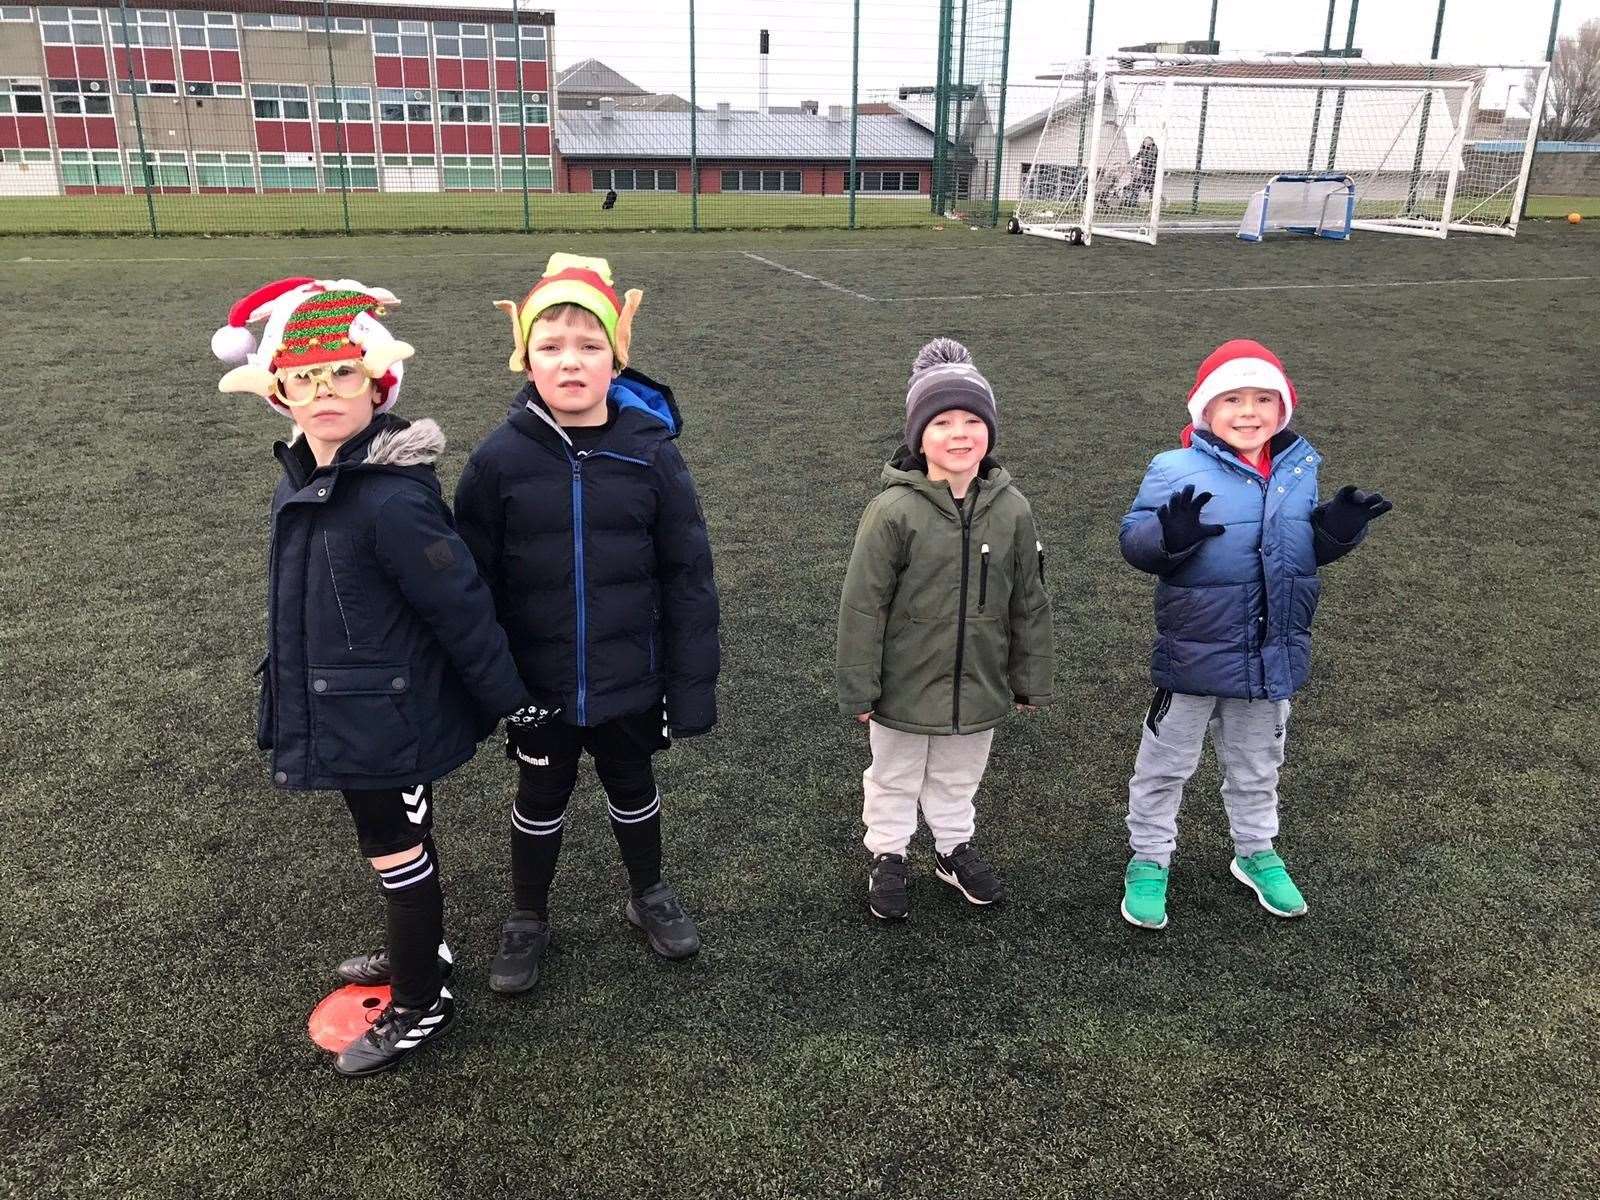 These youngsters sport a festive look at the fun session.